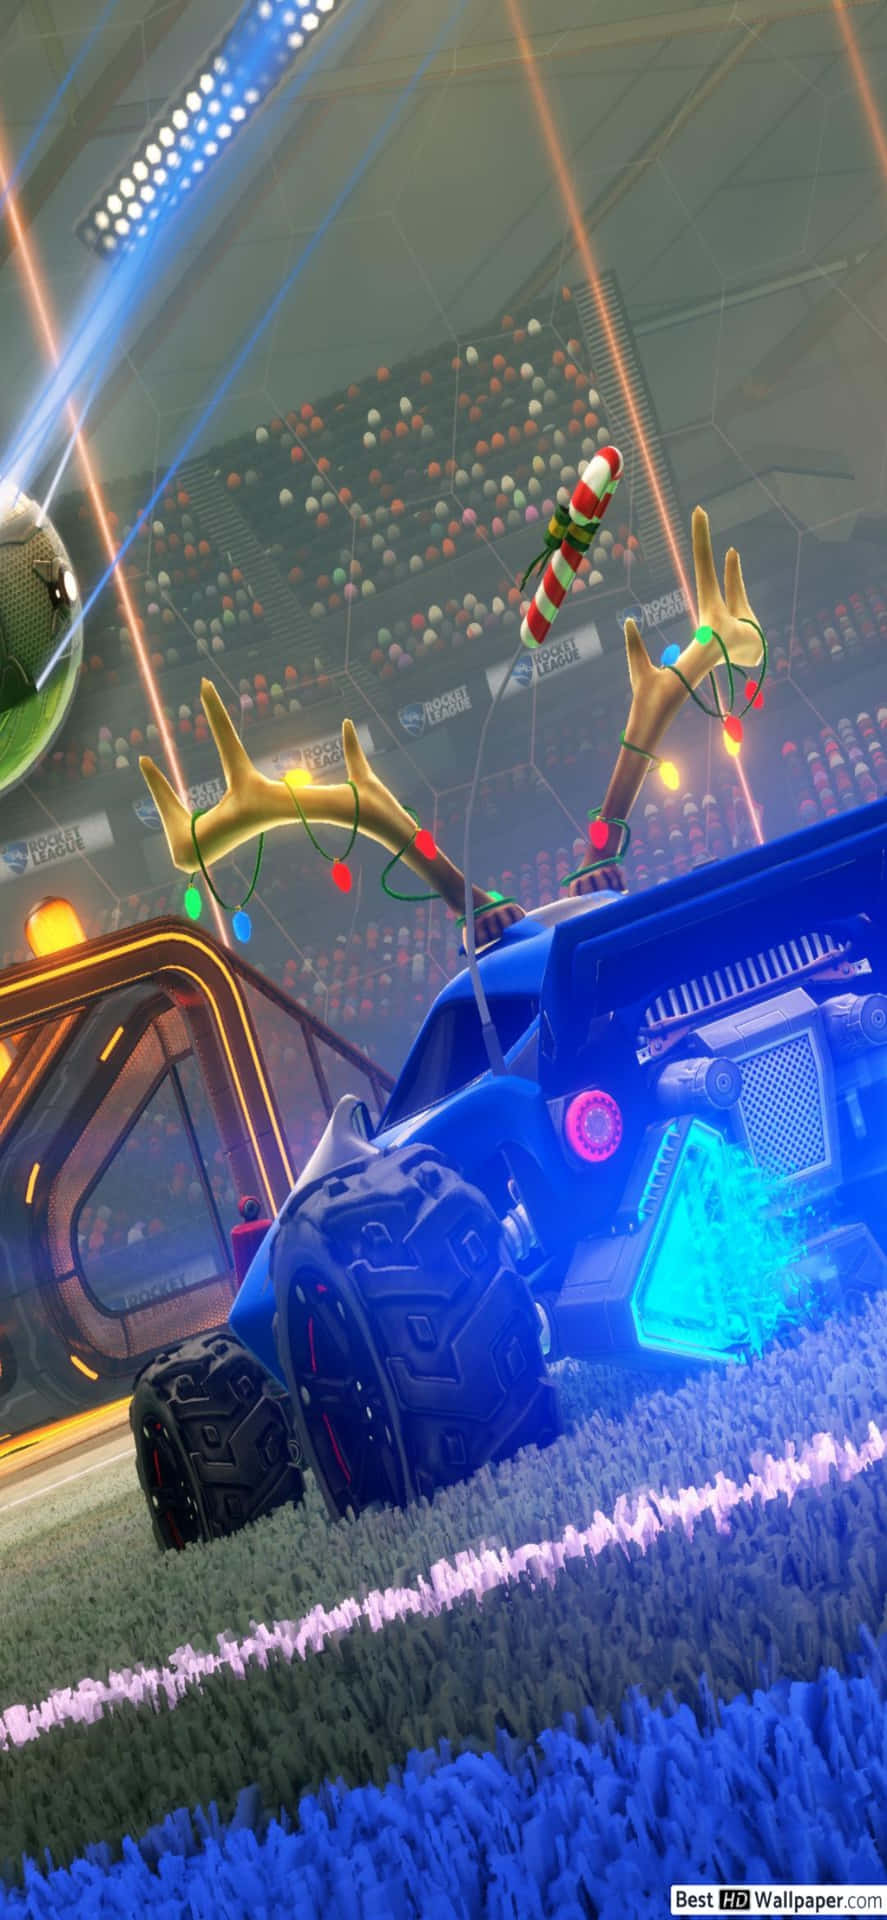 Take your game to the next level with the iPhone Xs Max and Rocket League